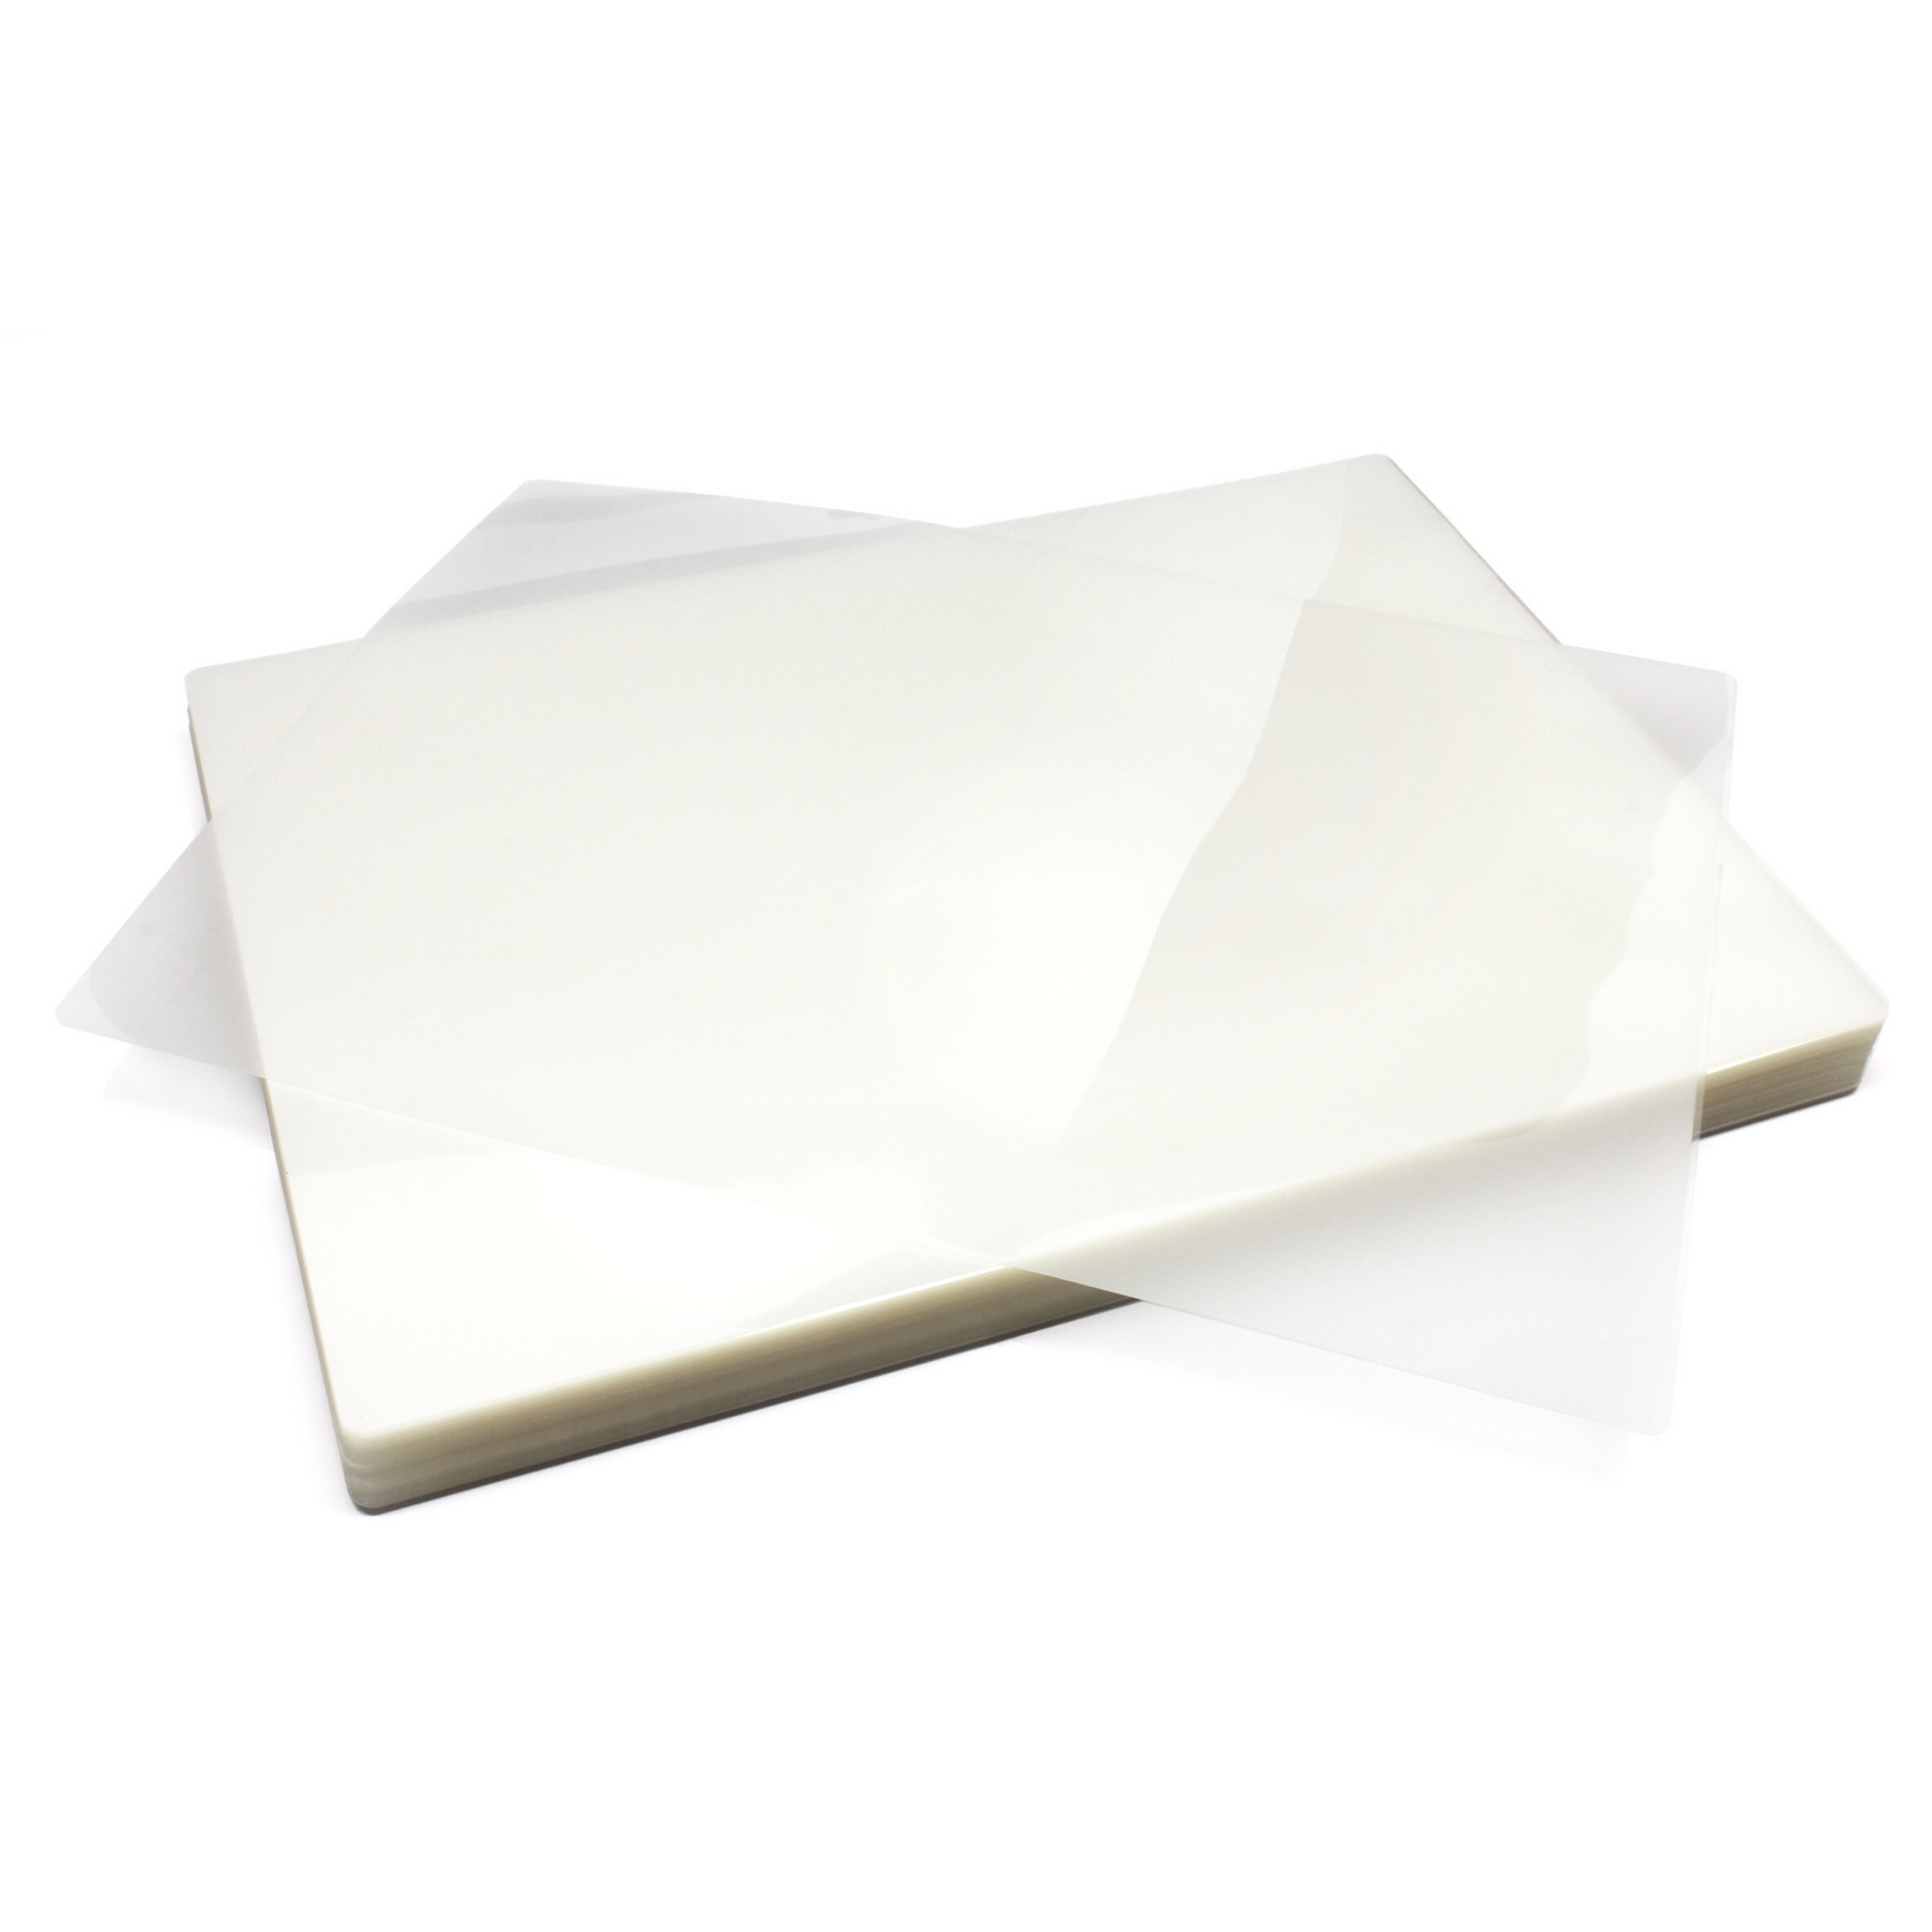 Several A3 gloss laminating pouches with a 150 micron thickness, fanned out on a white surface, highlighting the sheen and transparency of the material.